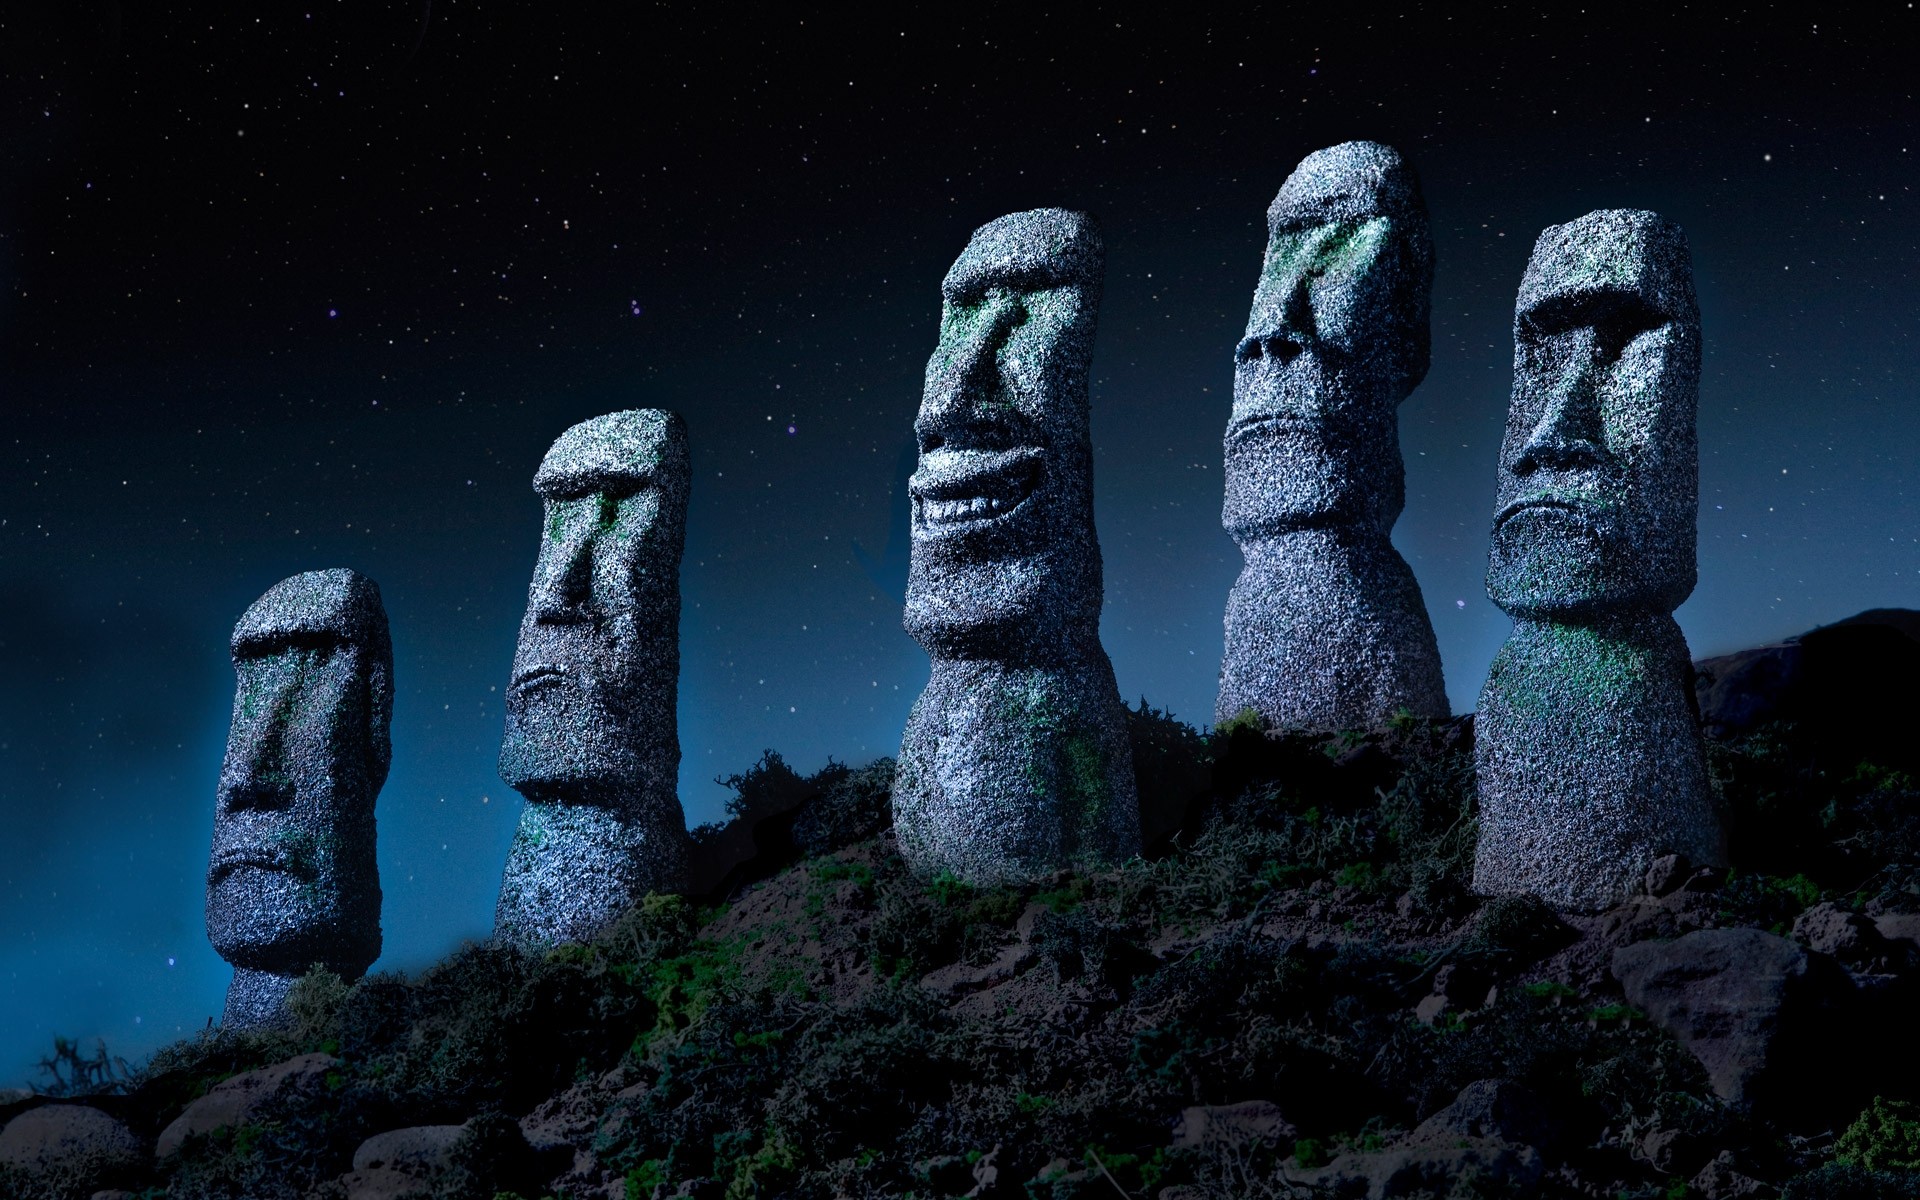 Easter Island Chile Starry Night Statue Moai Giant Stone Monuments Nature Landscape 1920x1200